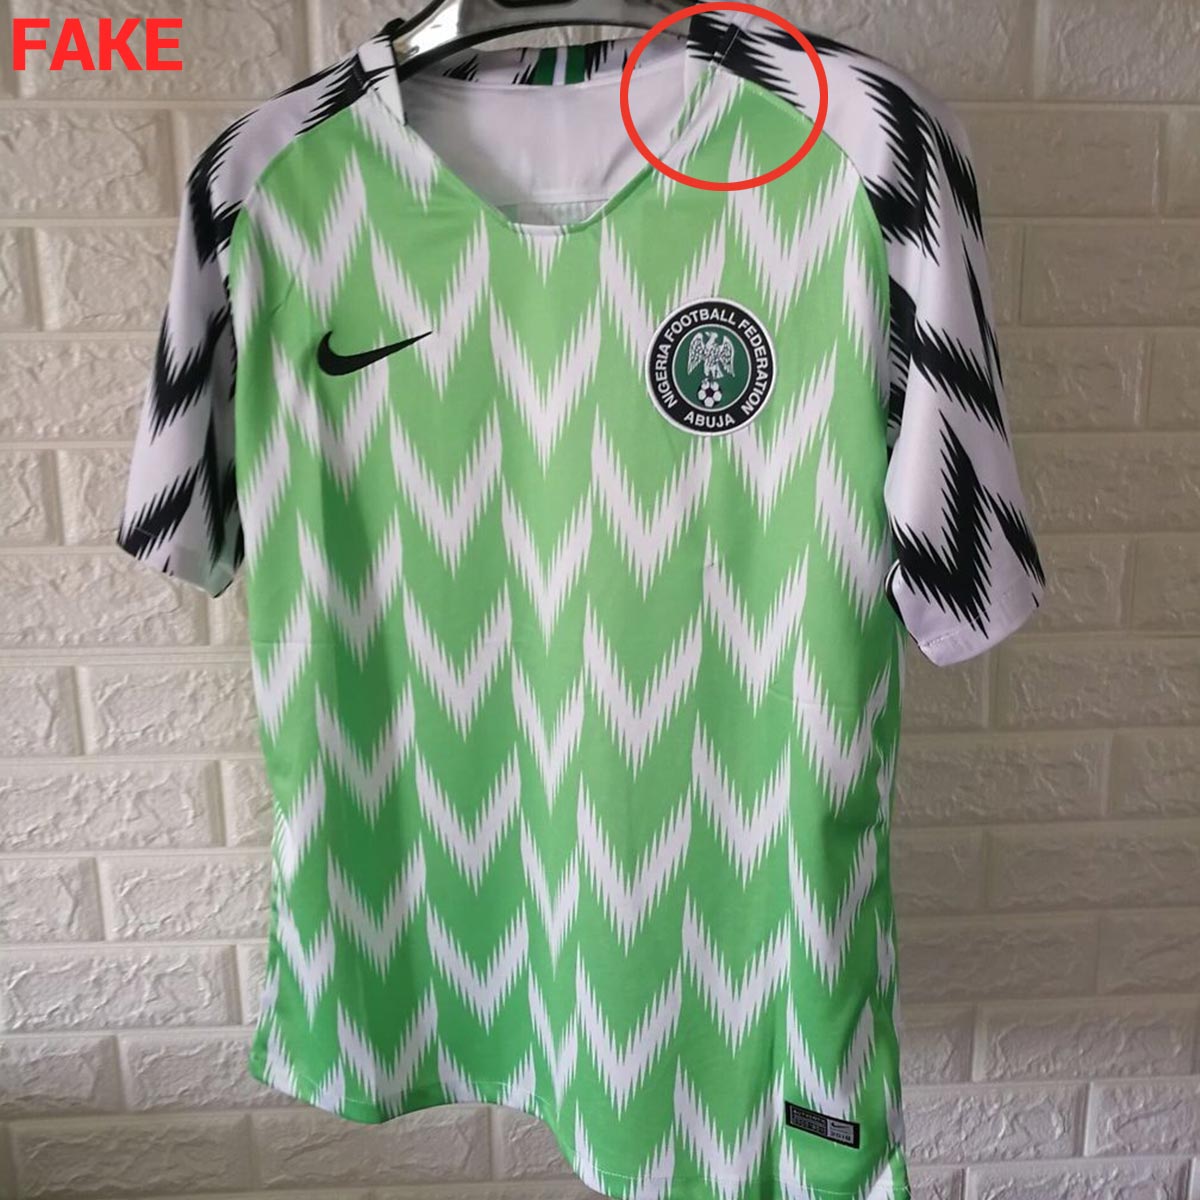 Be Aware - How To Detect A Fake Nike Nigeria 2018 World Cup - Footy Headlines